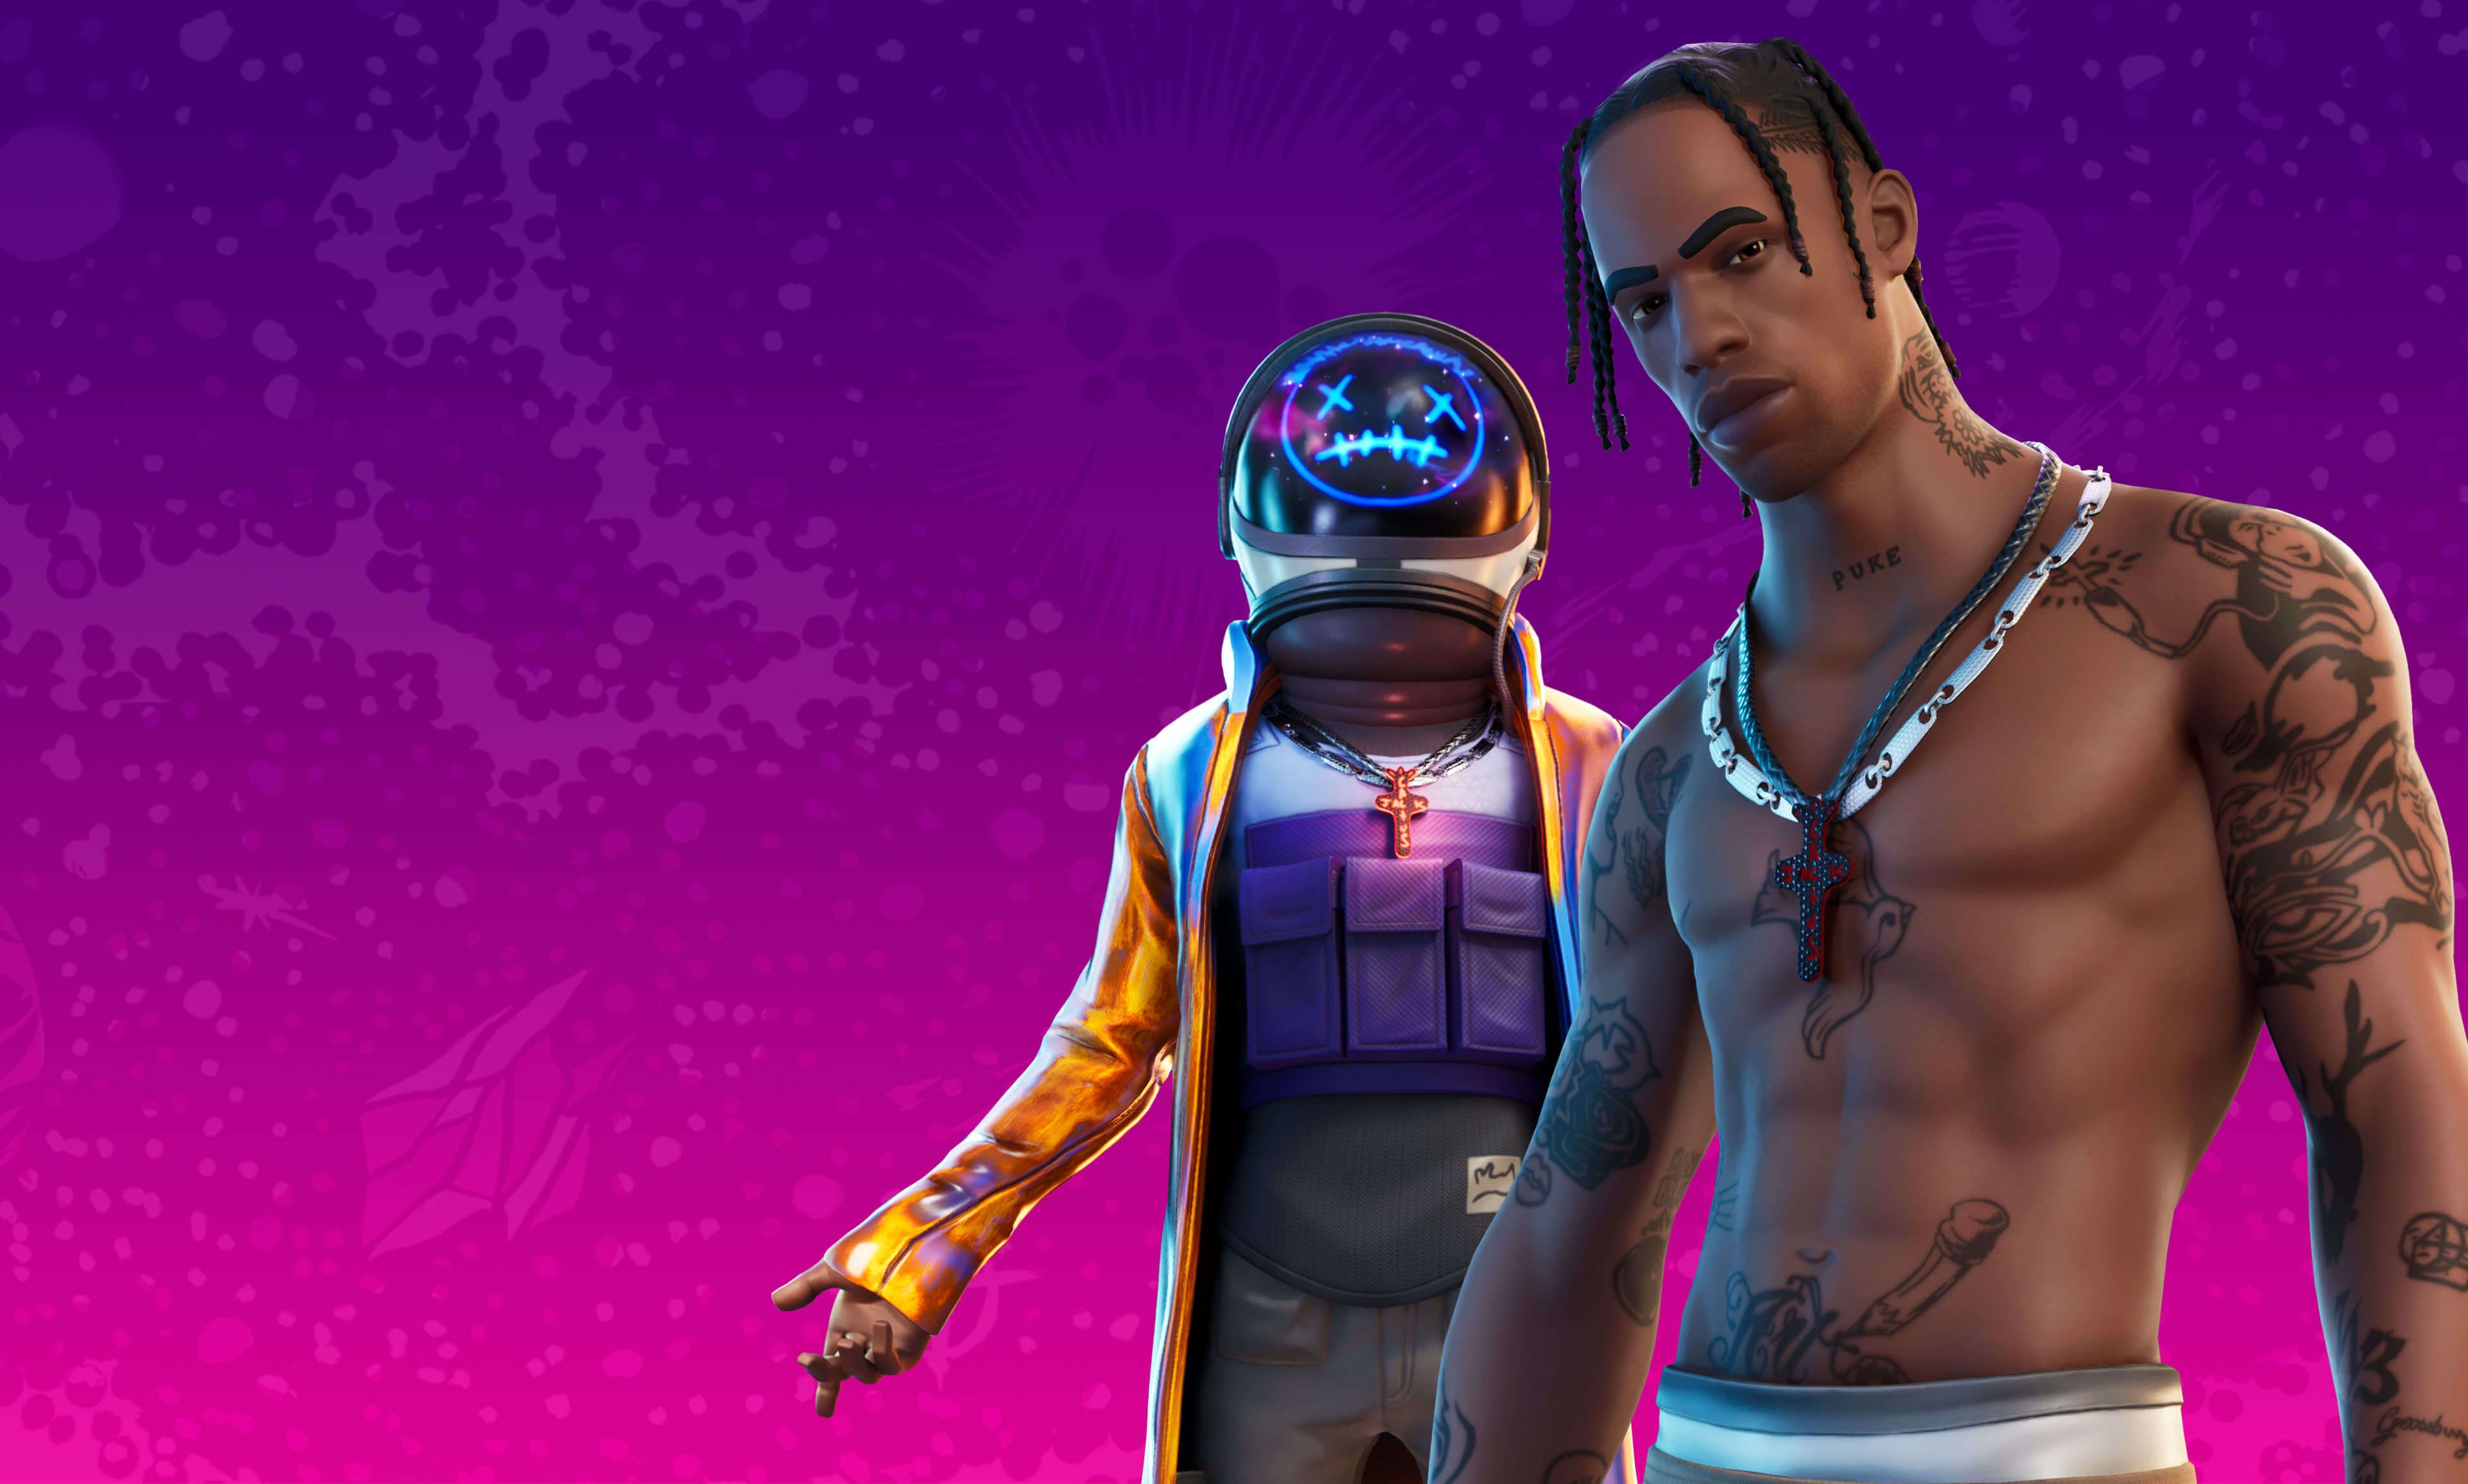 Fortnite Travis Scott 2020 4k, HD Games, 4k Wallpaper, Image, Background, Photo and Picture